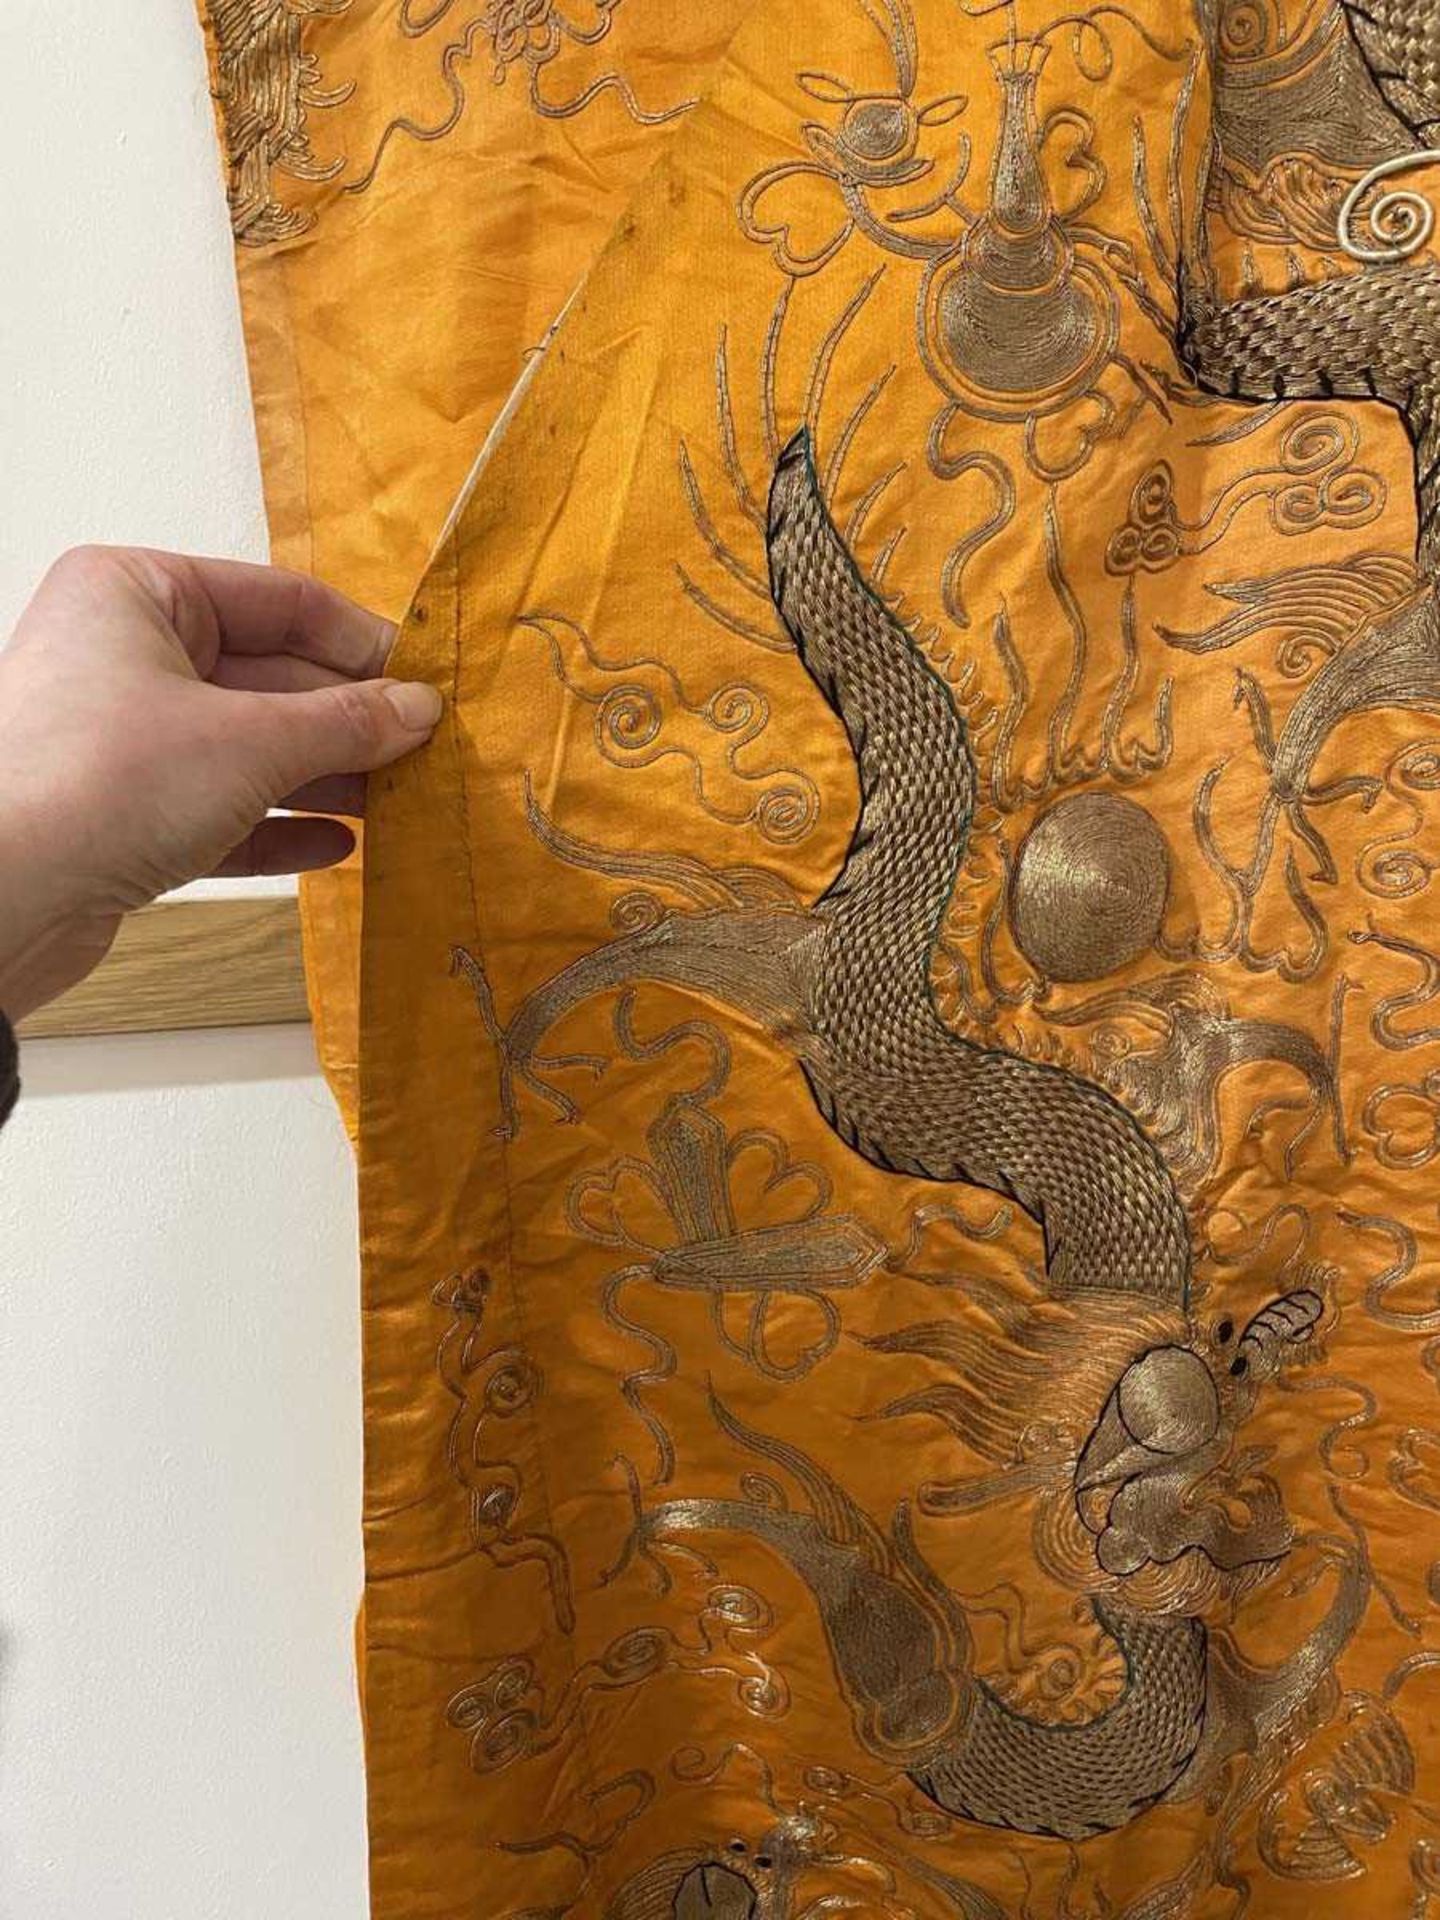 A Chinese robe section worked in gold coloured threads depicting dragons and a pagoda on an orange - Bild 7 aus 15